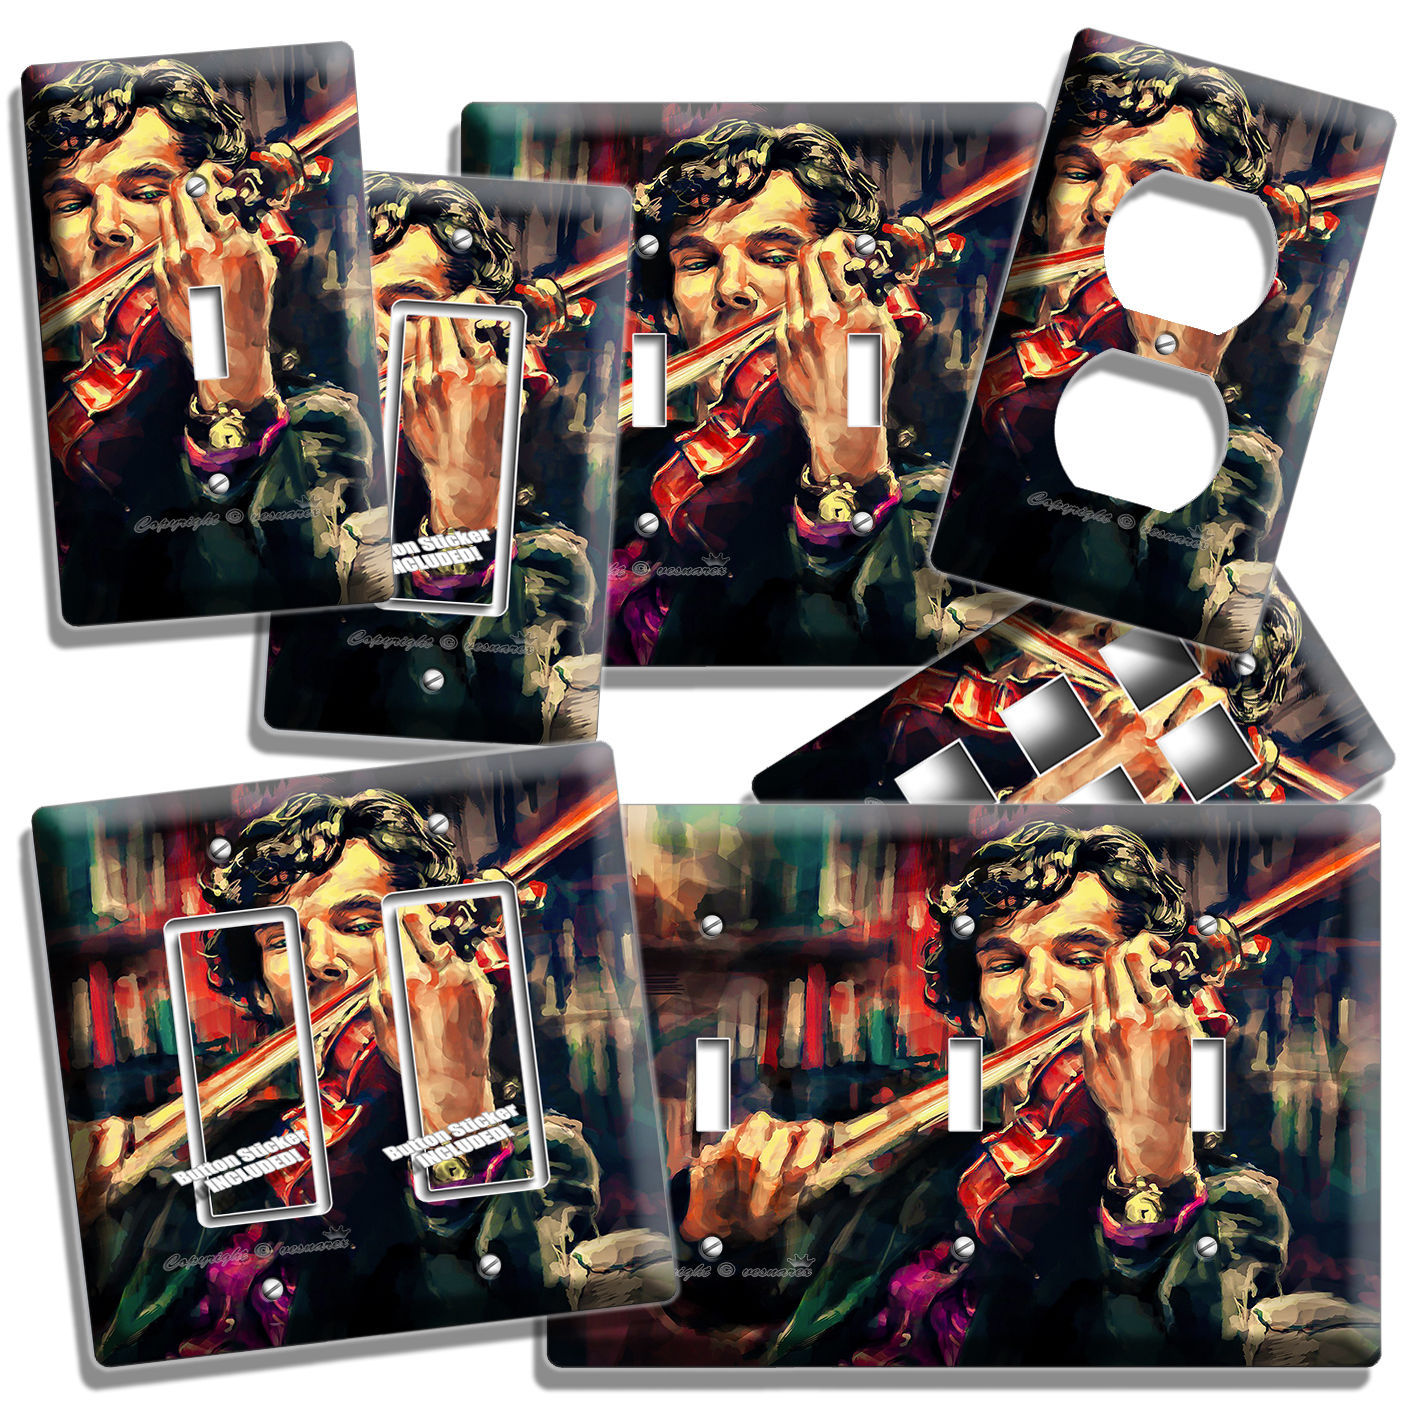 SHERLOCK HOLMES VIOLIN BENEDICT CUMBERBATCH LIGHT SWITCH OUTLET WALL ROOM DECOR - $16.37 - $27.29